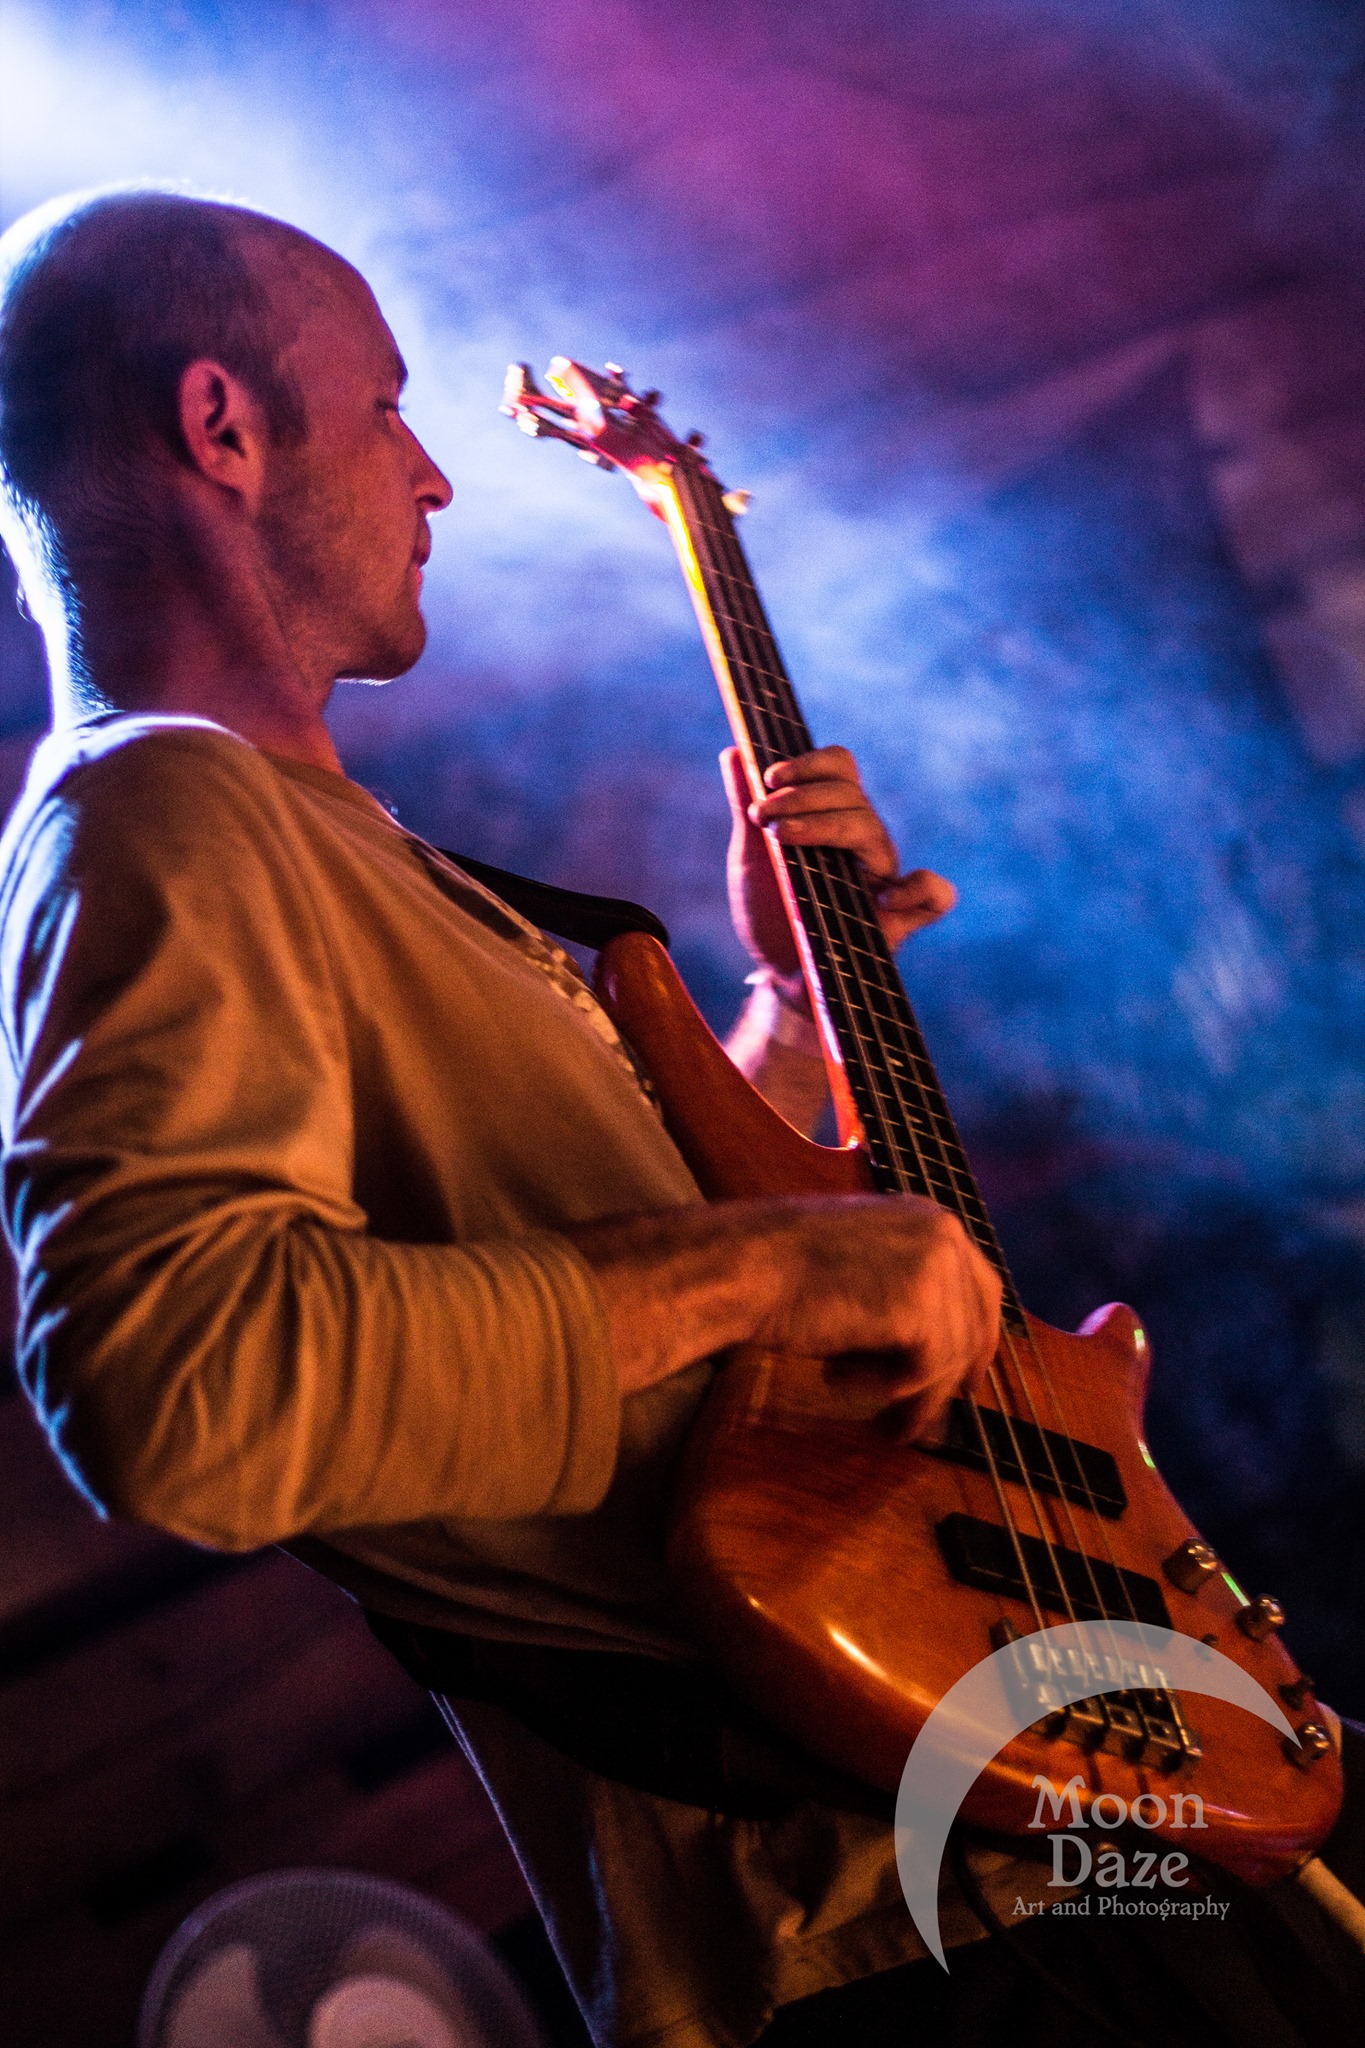 A photo of Greg Goad playing bass live on stage under purple concert lighting and fog. Taken by Moon Daze photography.